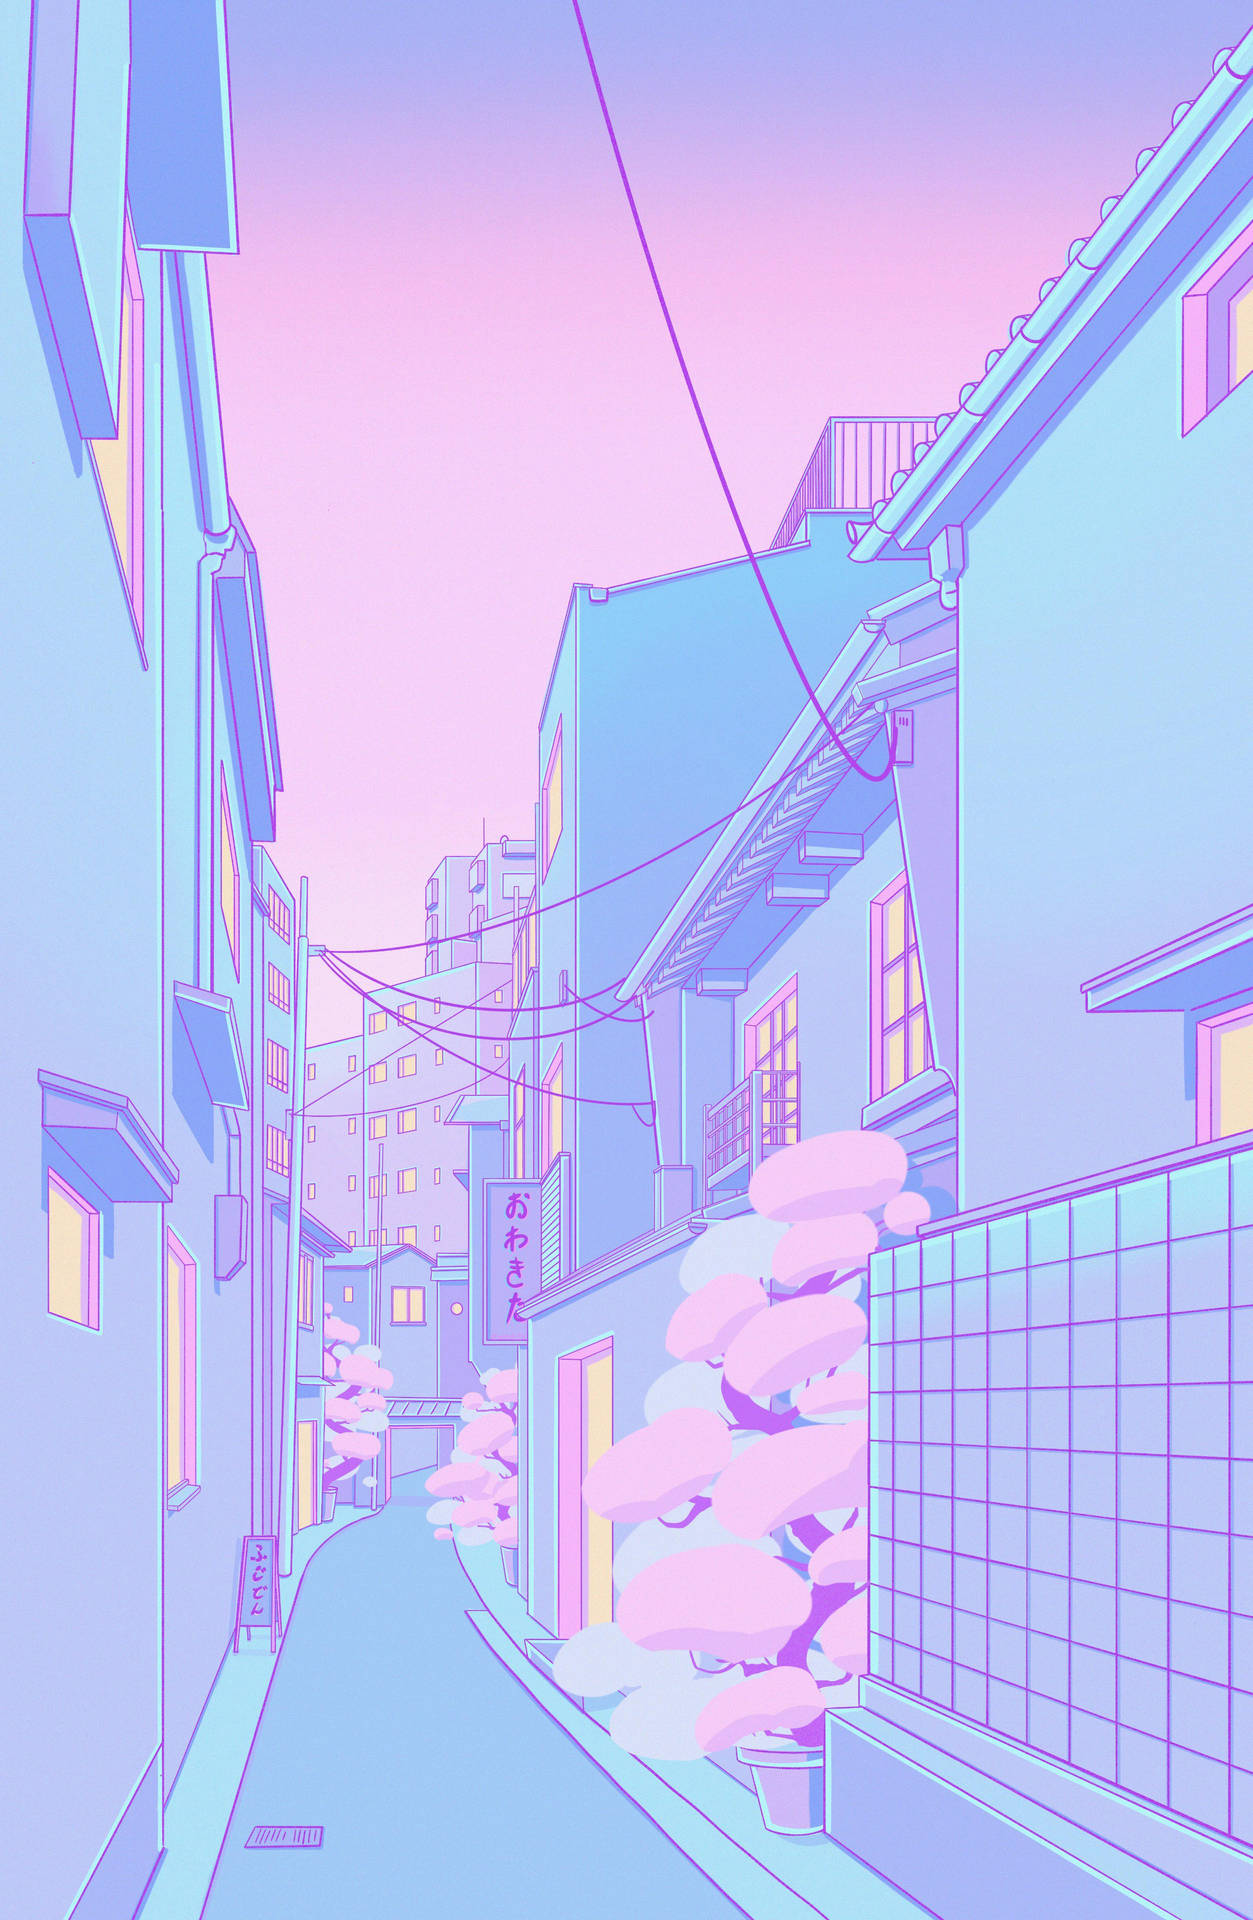 Top 999+ Pastel Japanese Aesthetic Wallpaper Full HD, 4K Free to Use